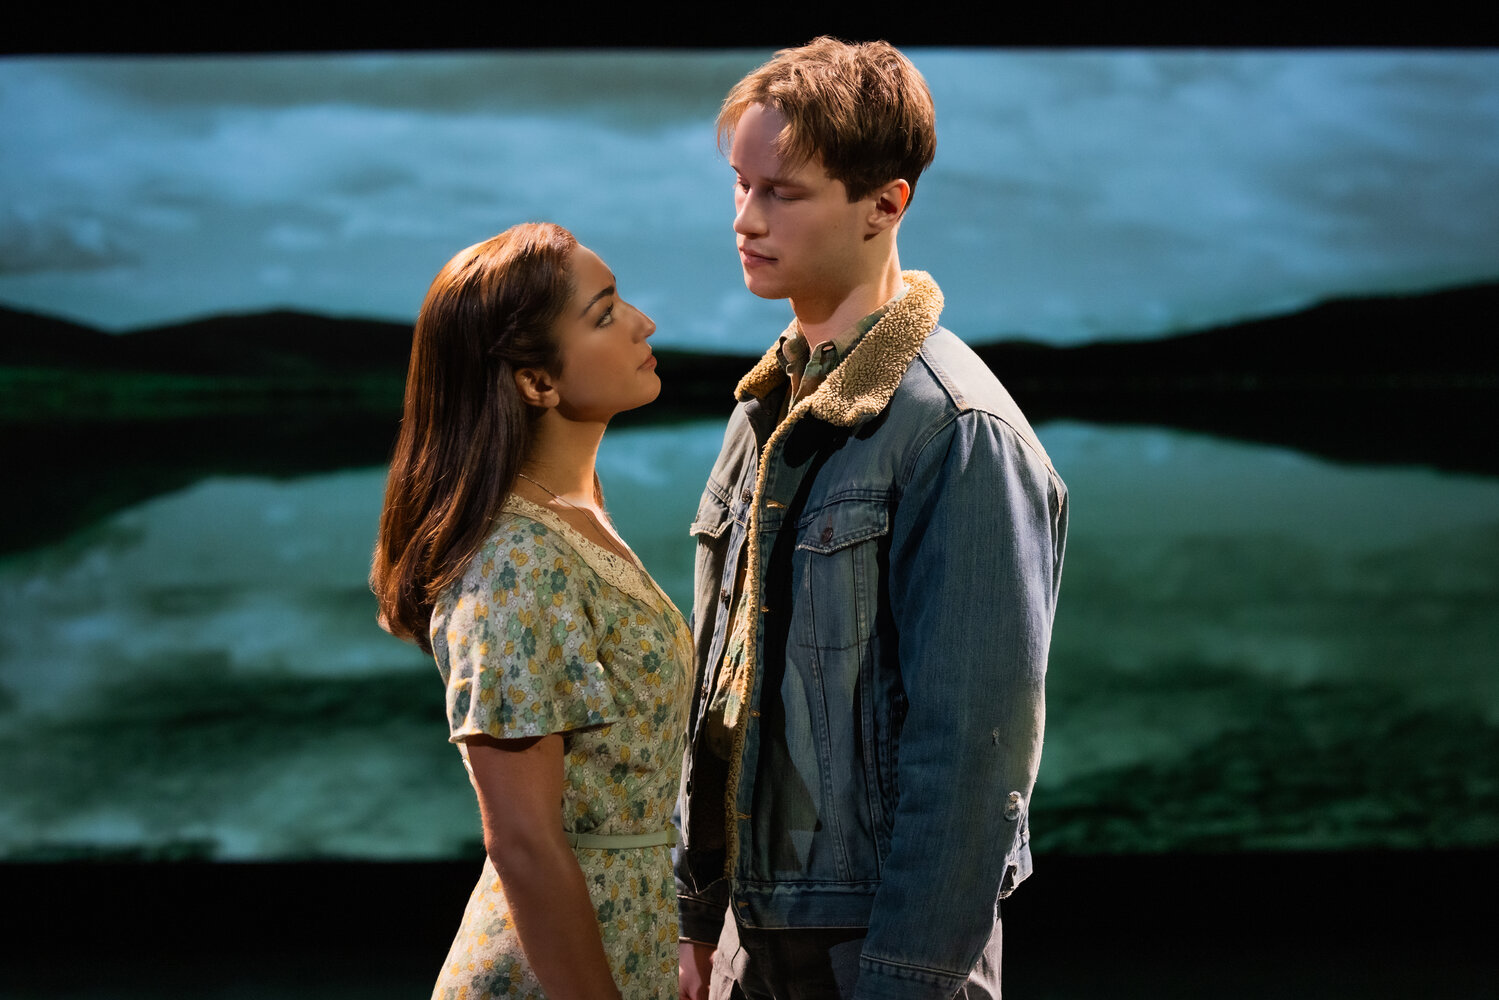 Chiara Trentalange, Upper Southampton native, and Ben Biggers share the stage in the “Girl From The North Country”  on its North American Tour.